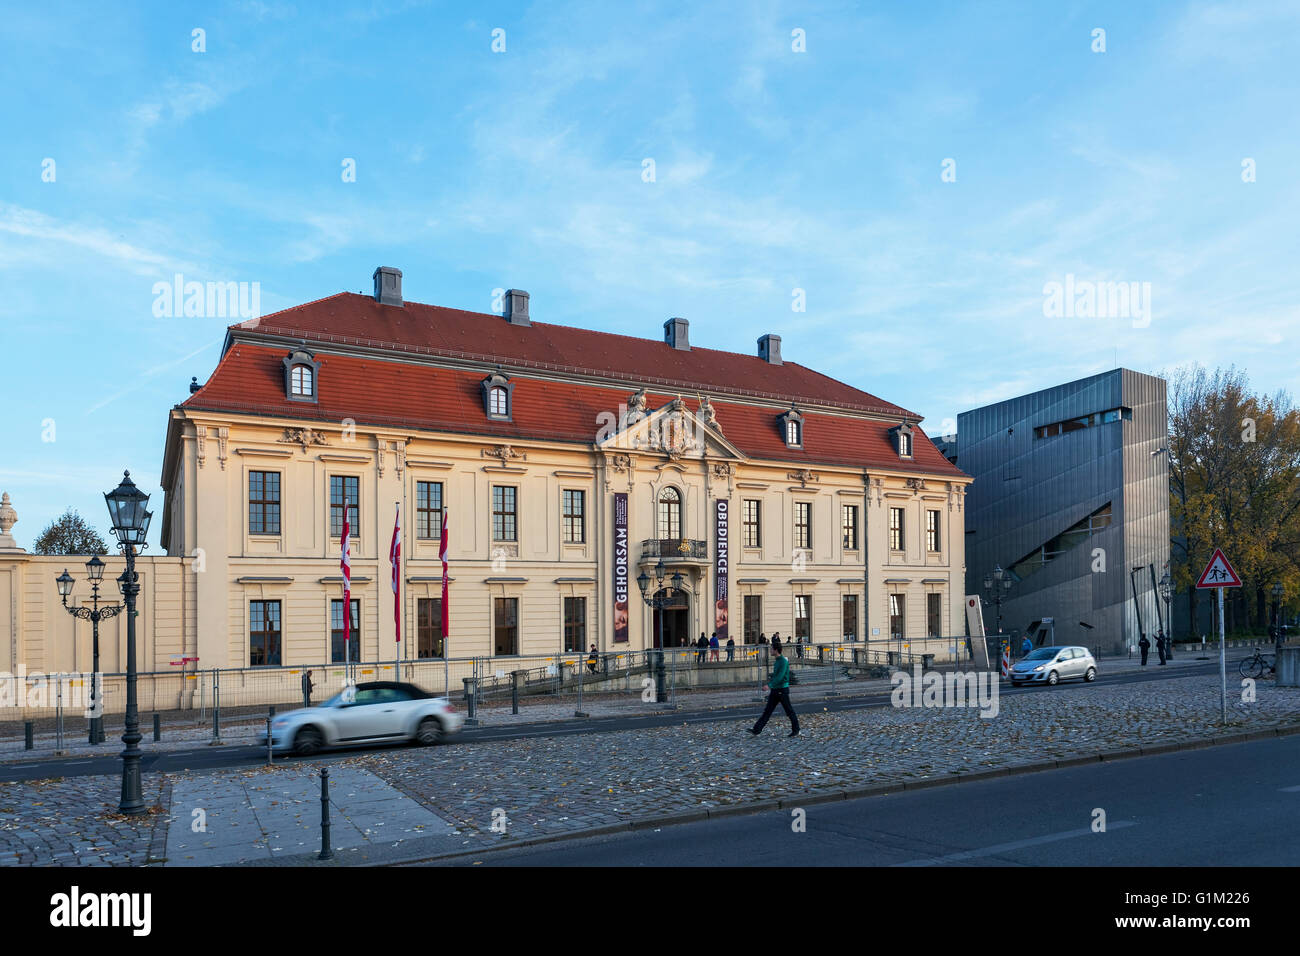 Judisches Museum (Jewish Museum) old building designed Philipp Gerlach in 1735, new building by Daniel Libeskind in 2001 , Berli Stock Photo